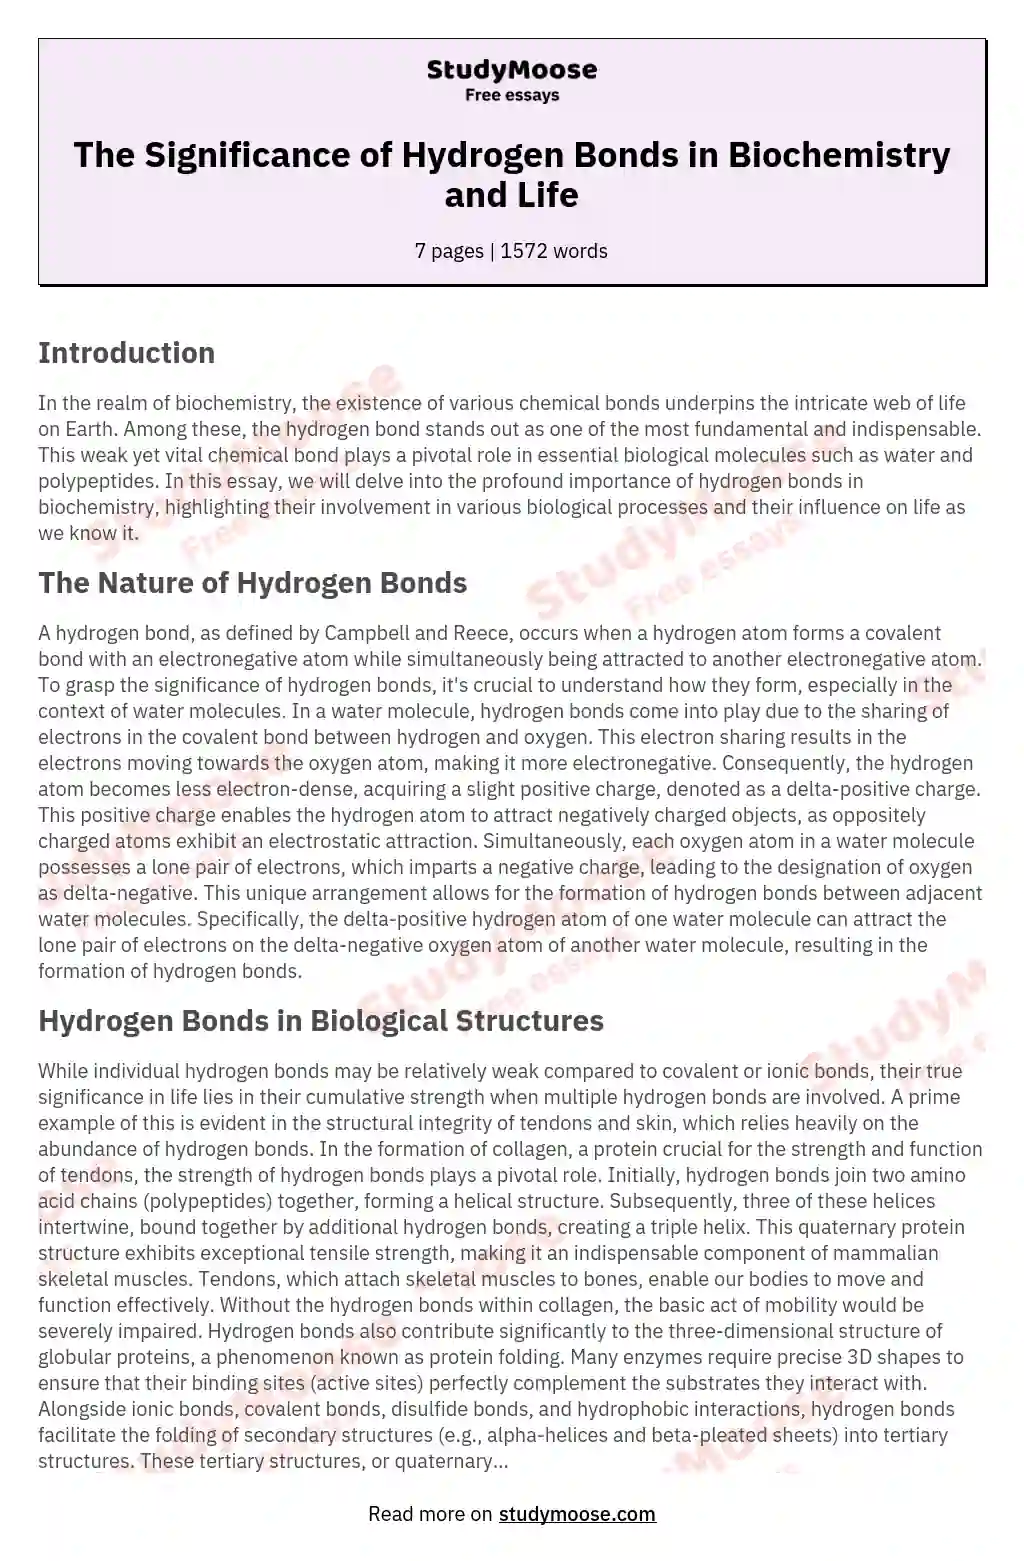 The Significance of Hydrogen Bonds in Biochemistry and Life essay